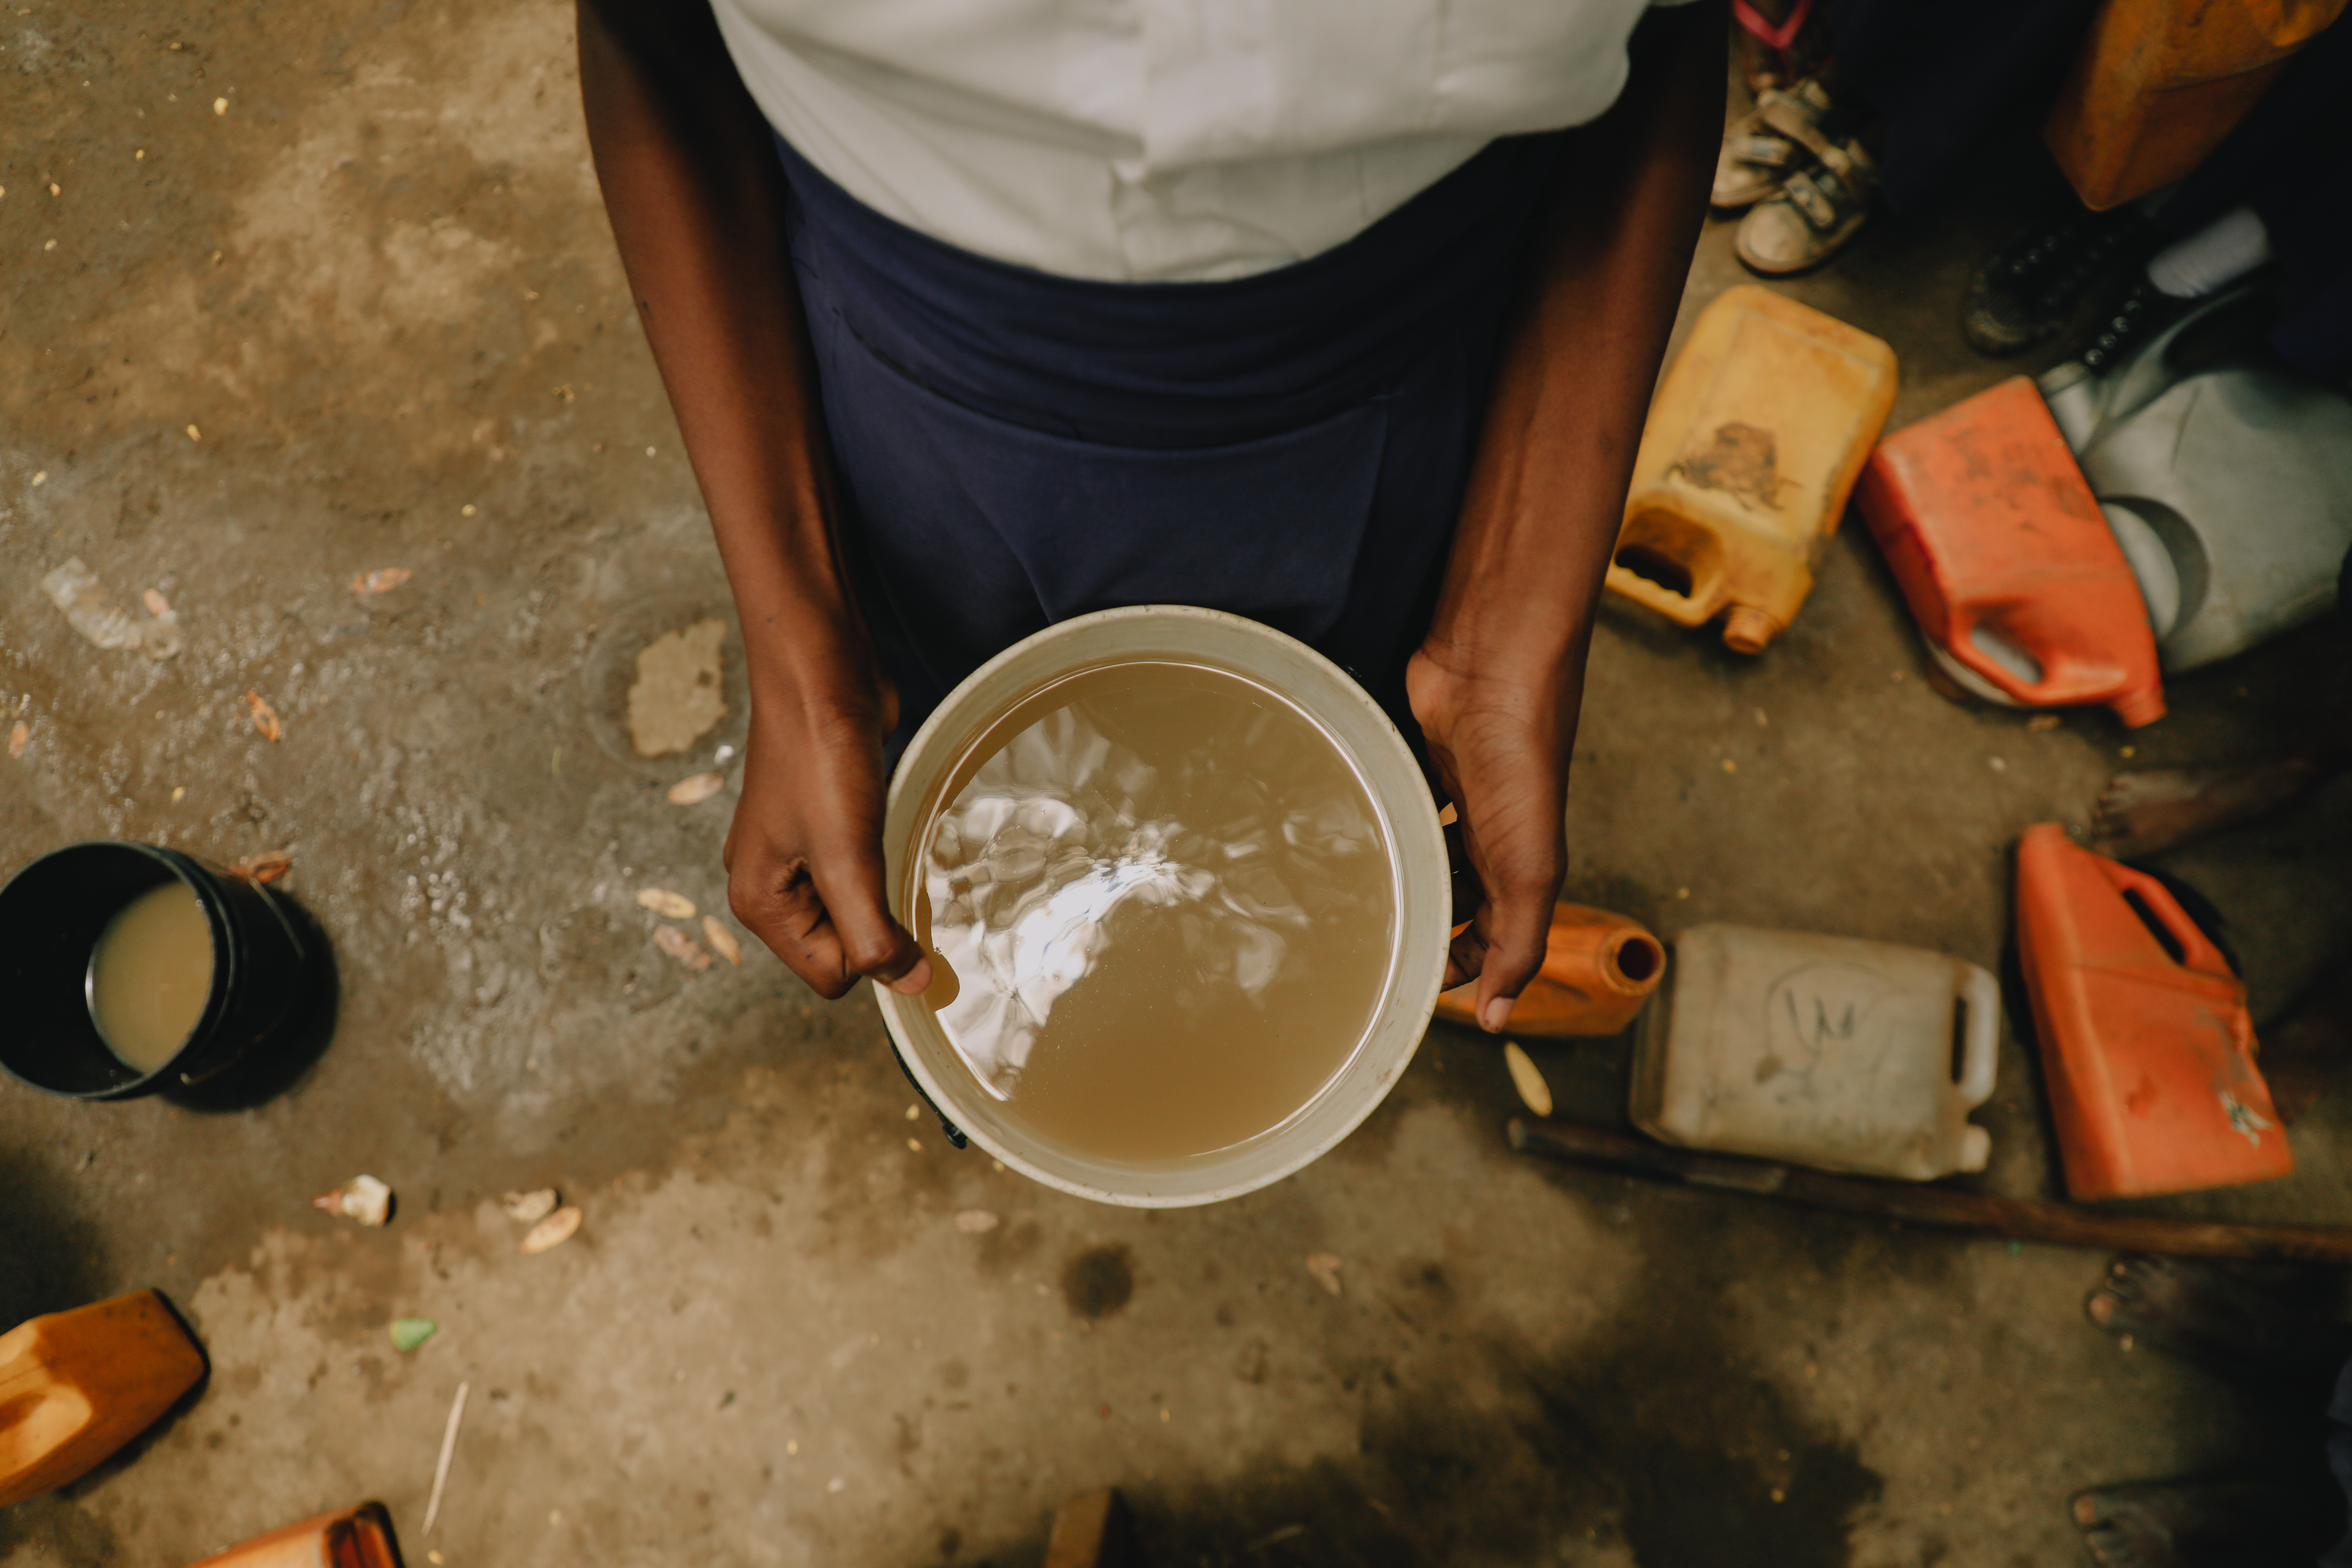 a child shows the water commonly used in the community in Tanzania. It's a murky brown.